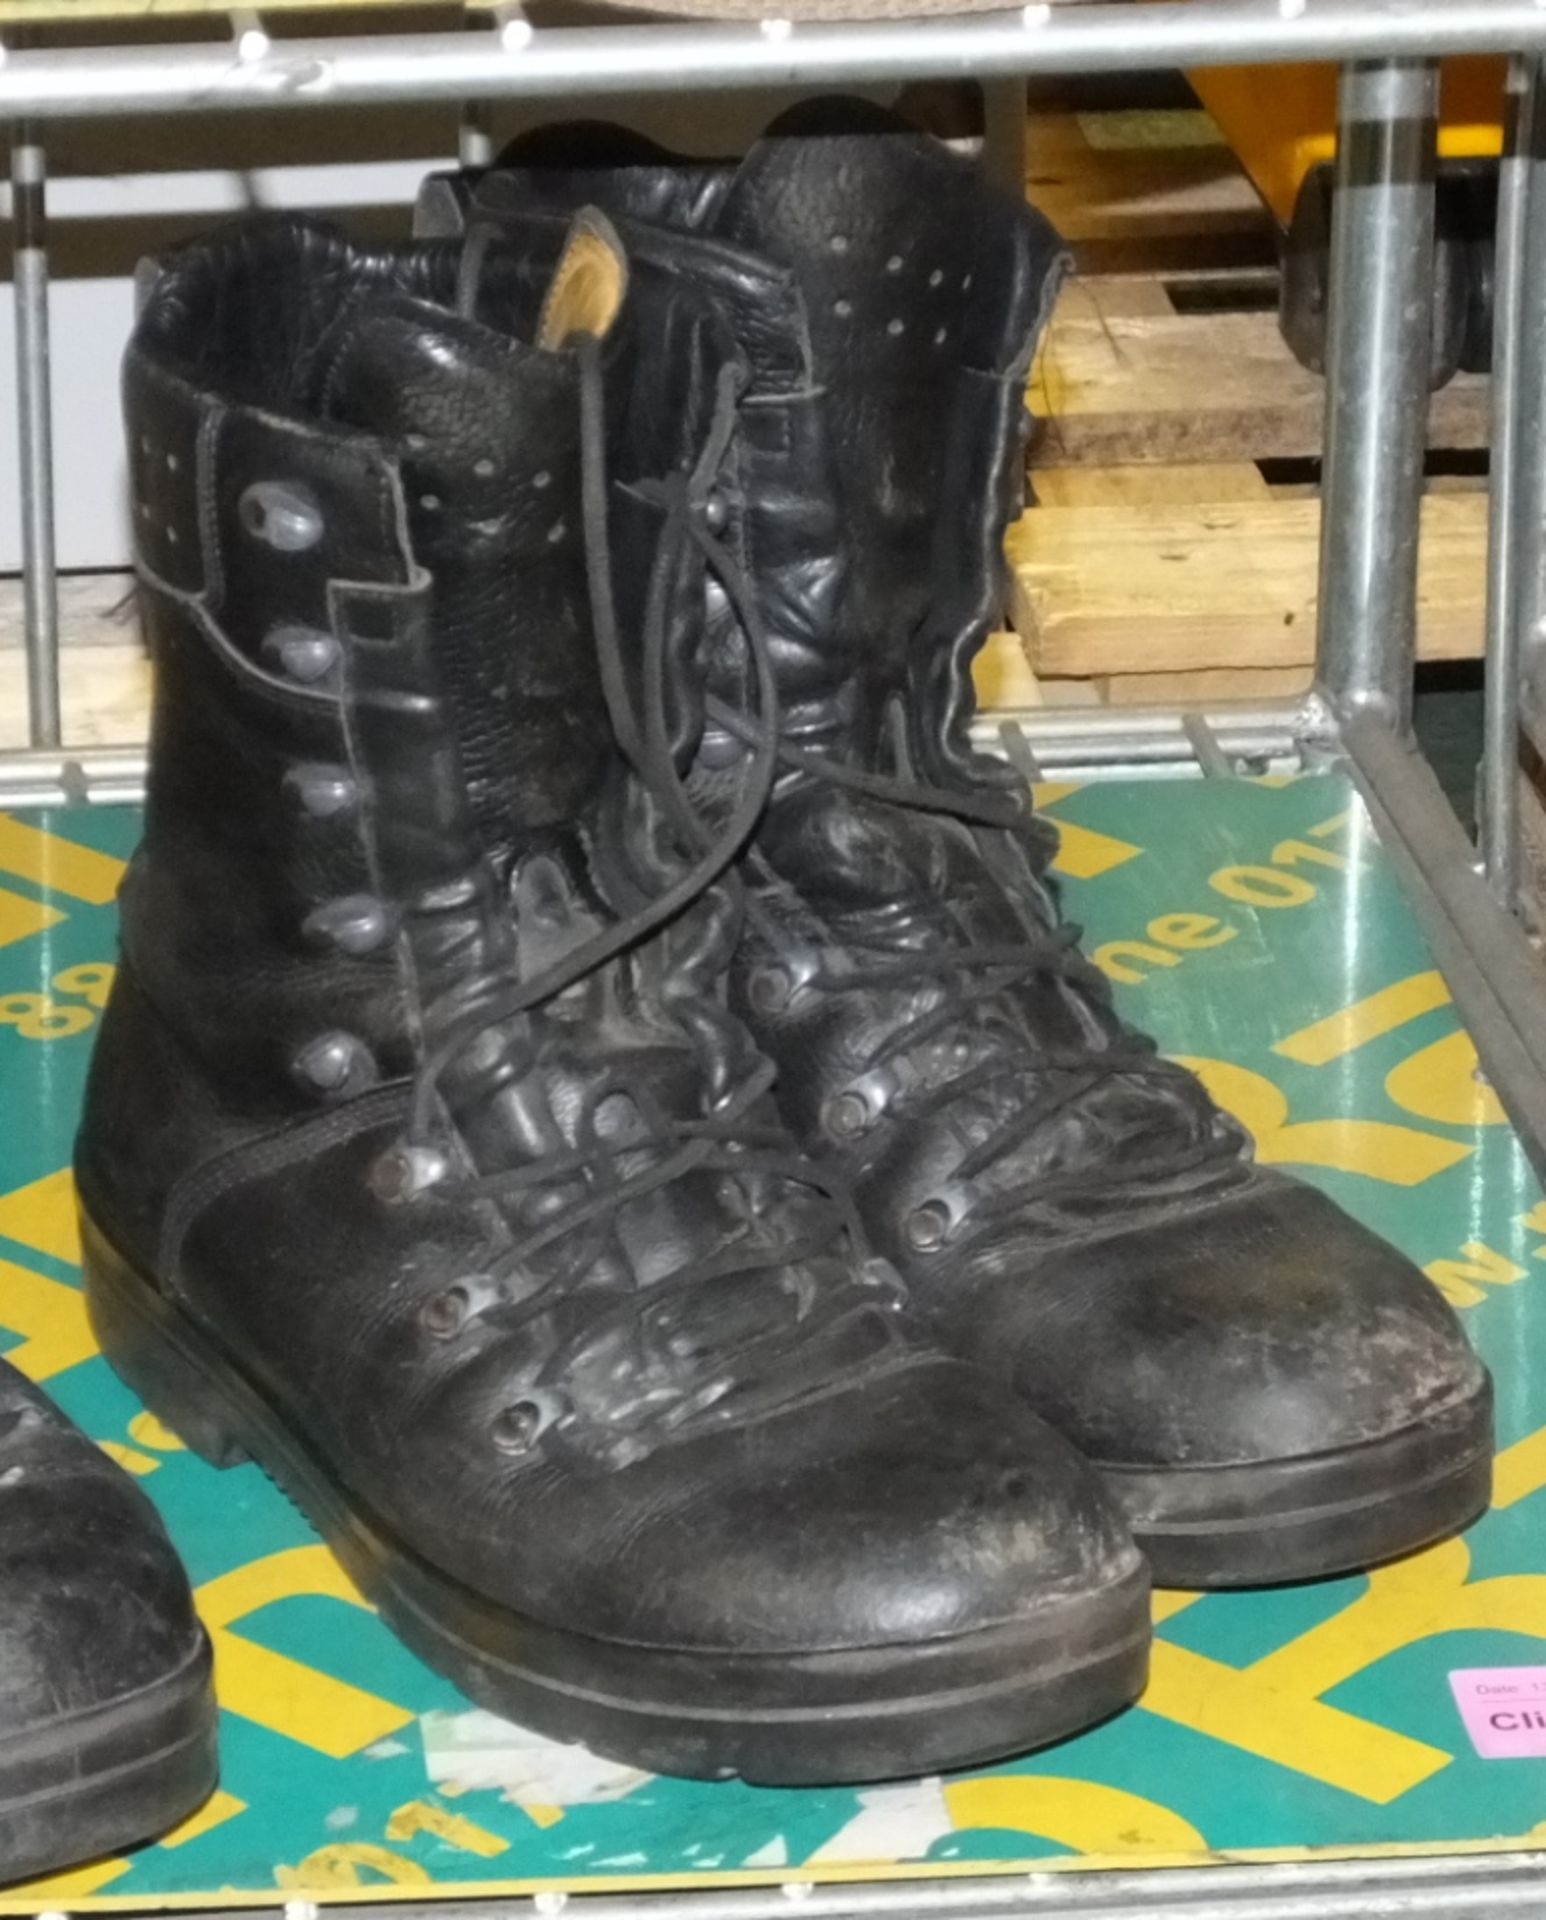 3x Heavy duty boots - German Para - unknown sizes - Image 2 of 4